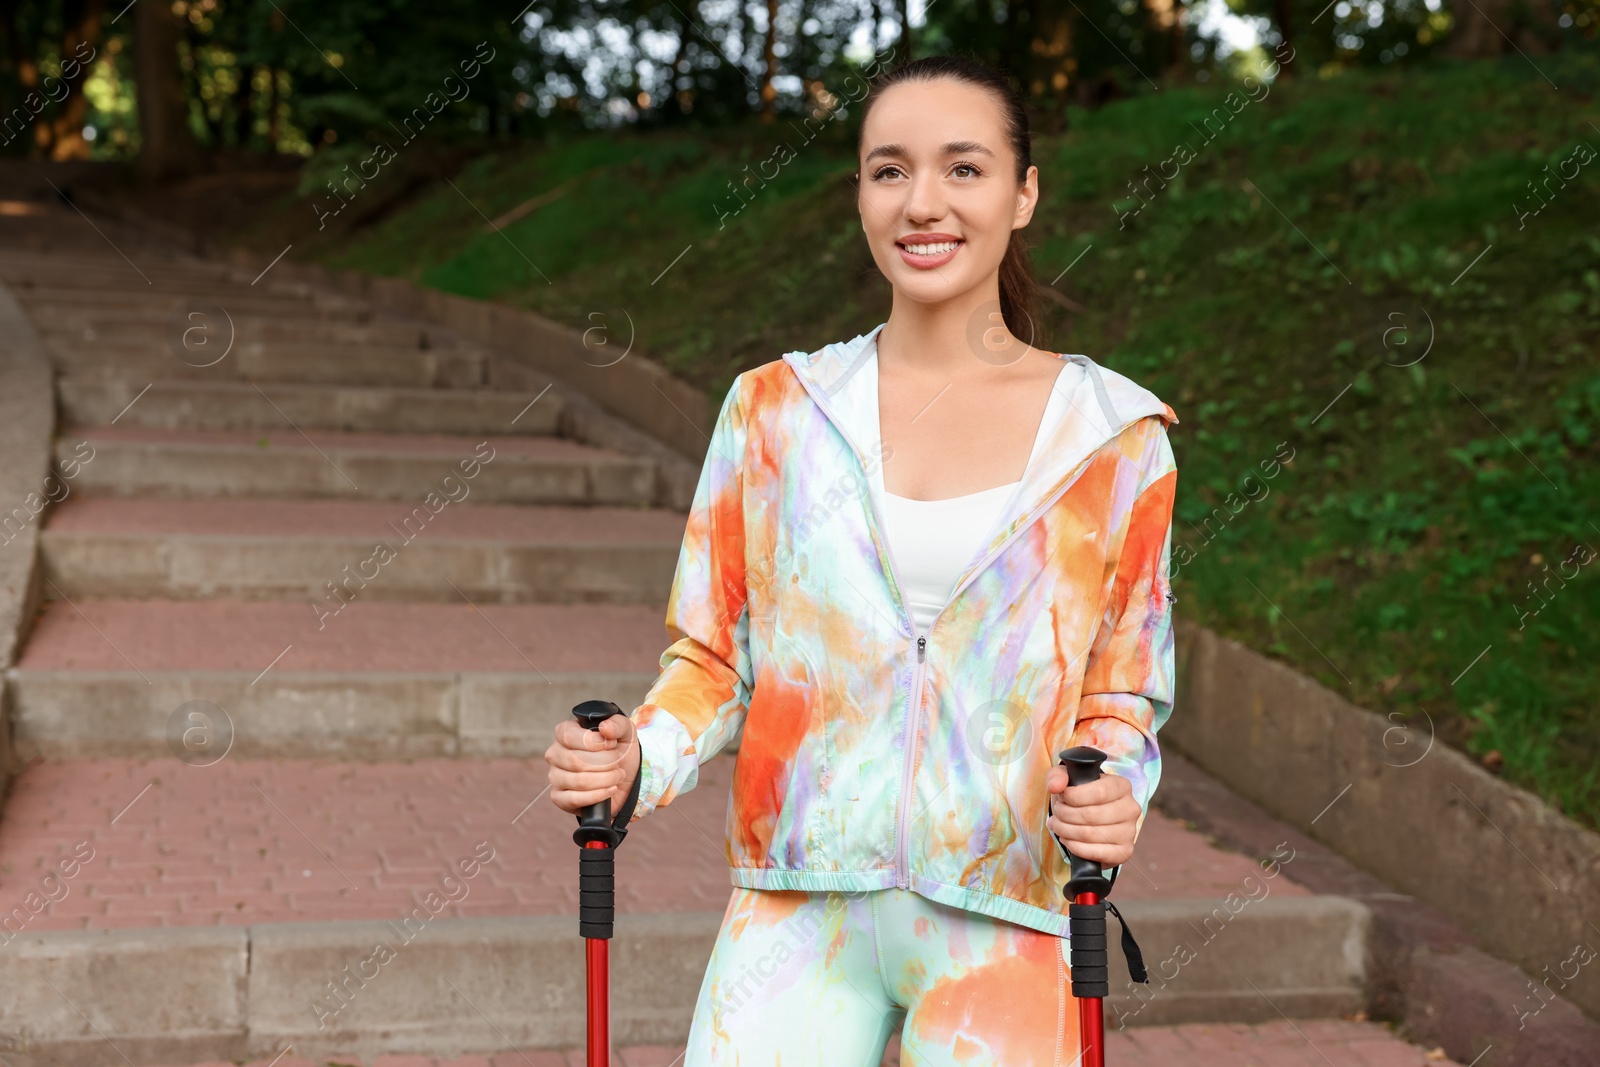 Photo of Young woman practicing Nordic walking with poles on steps outdoors